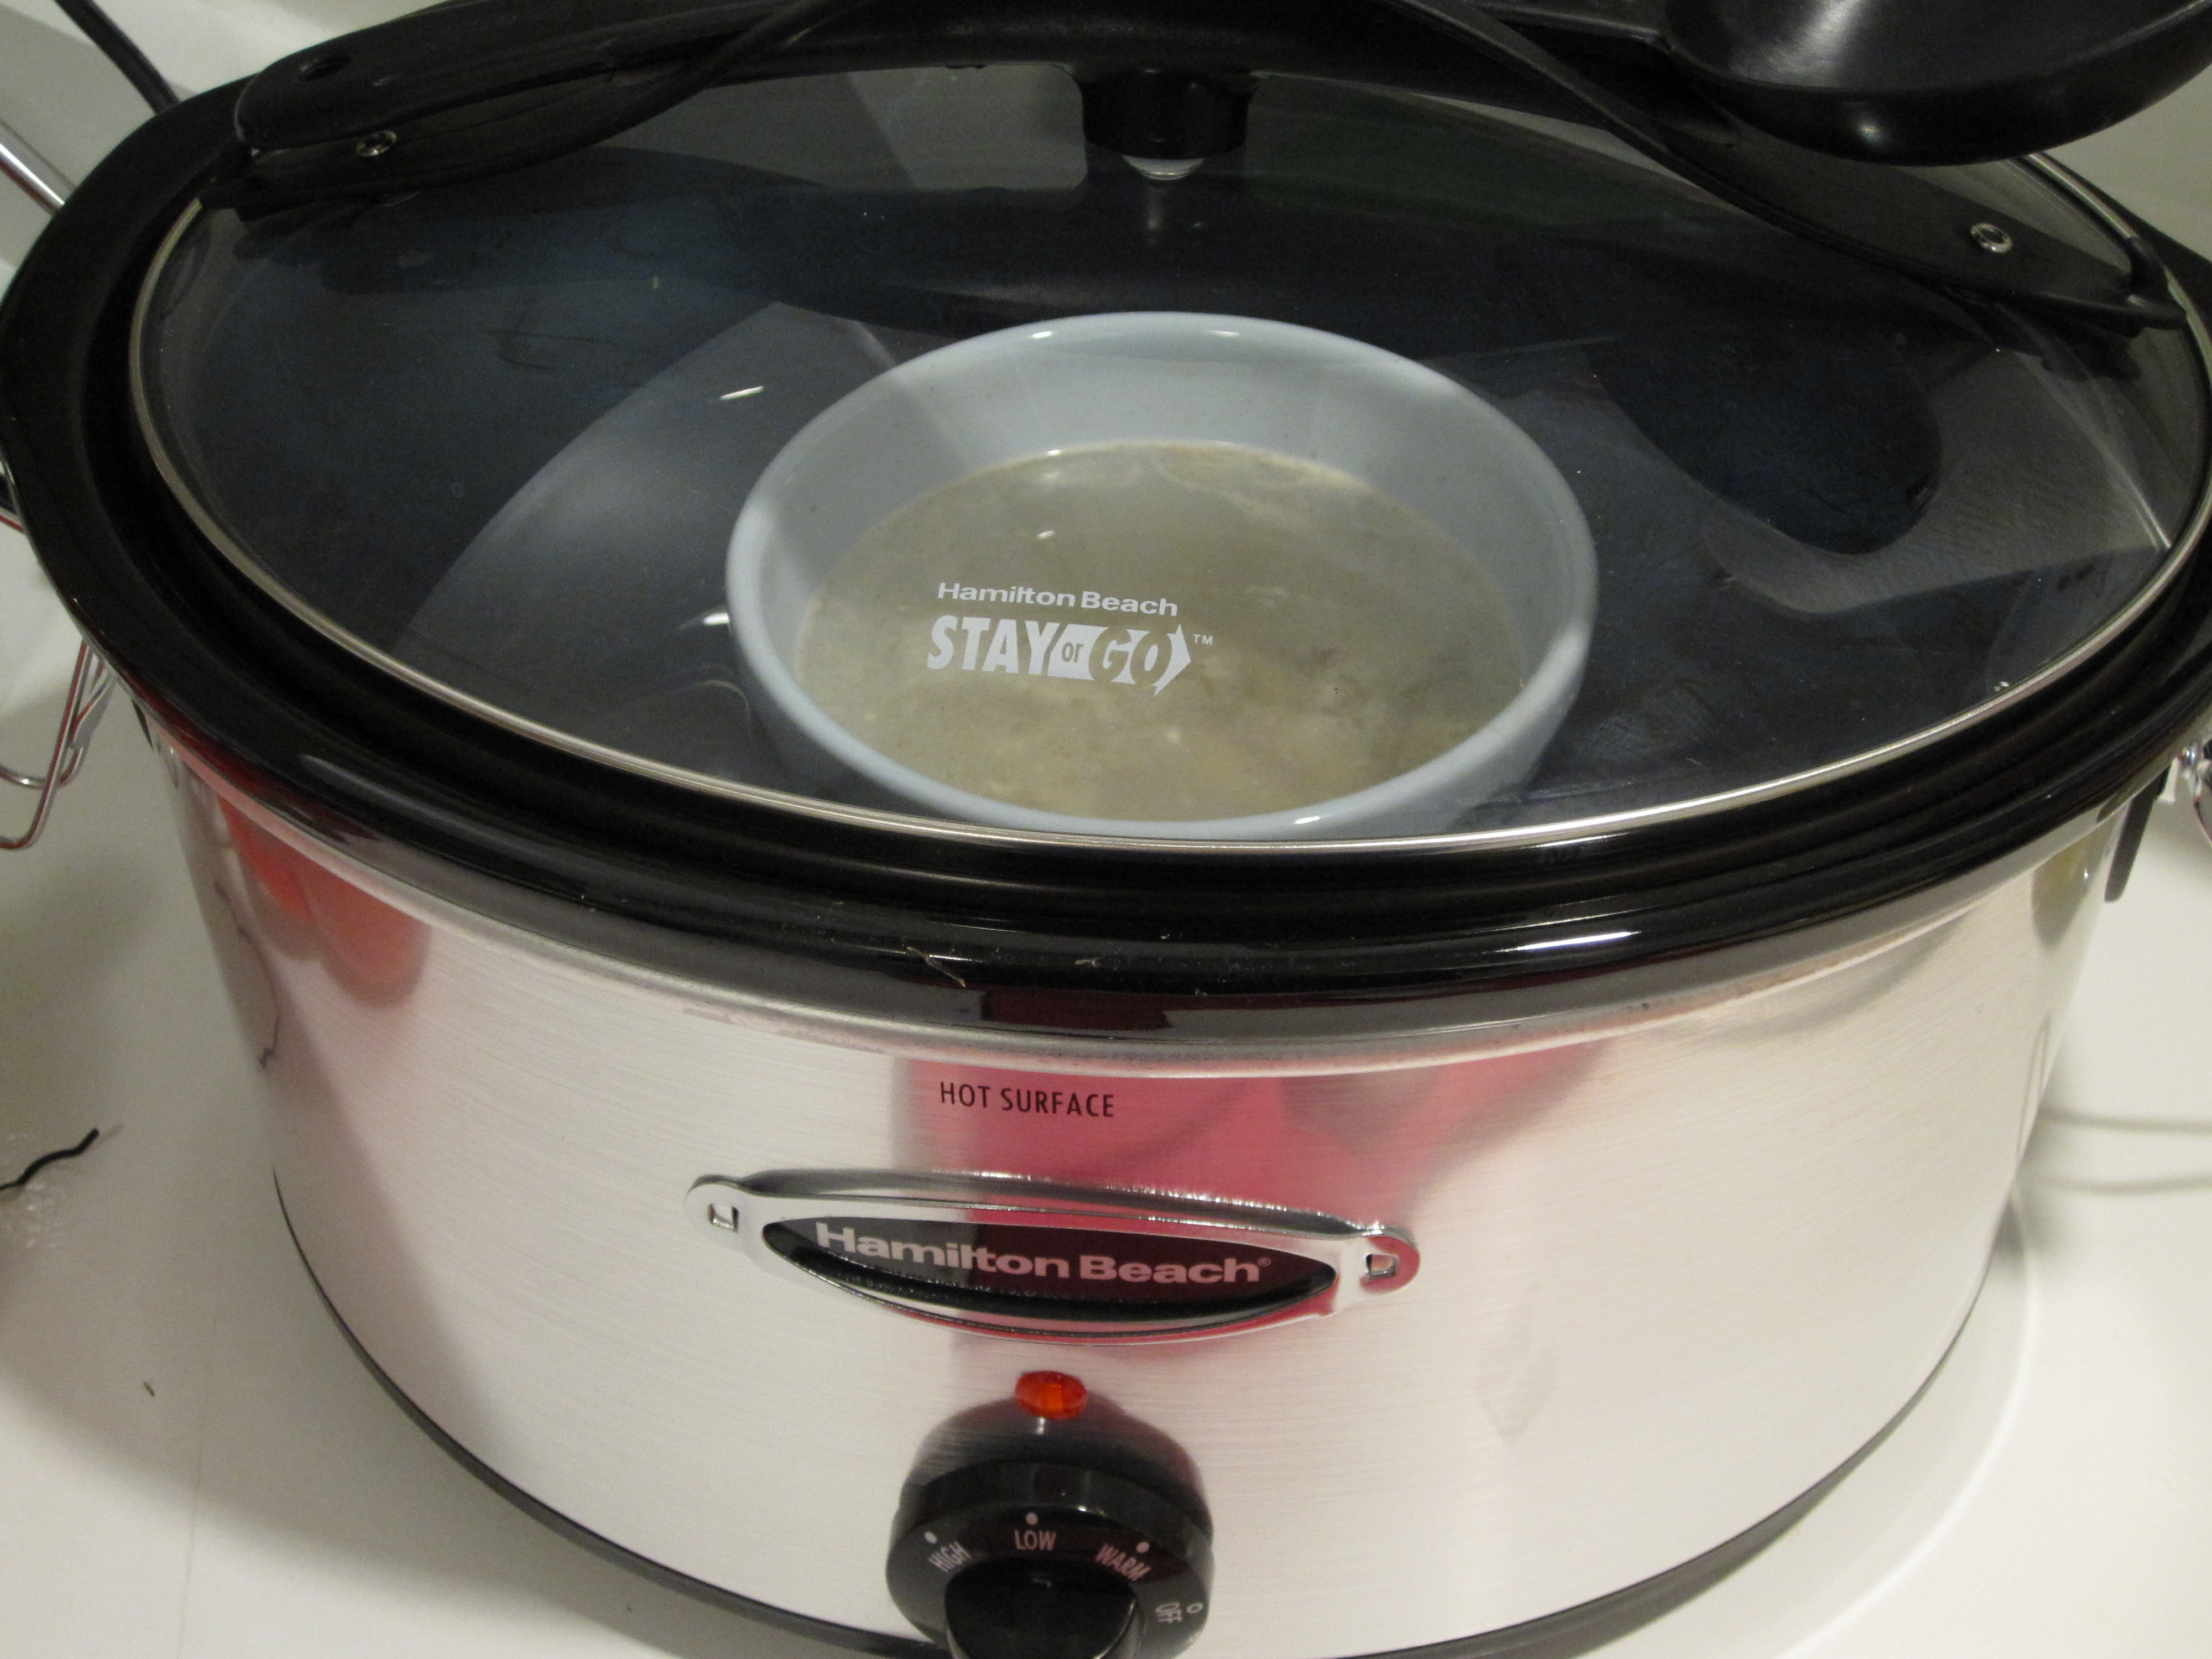 Slow Cooker vs. Double Boiler: Which is Better? - Megafurniture